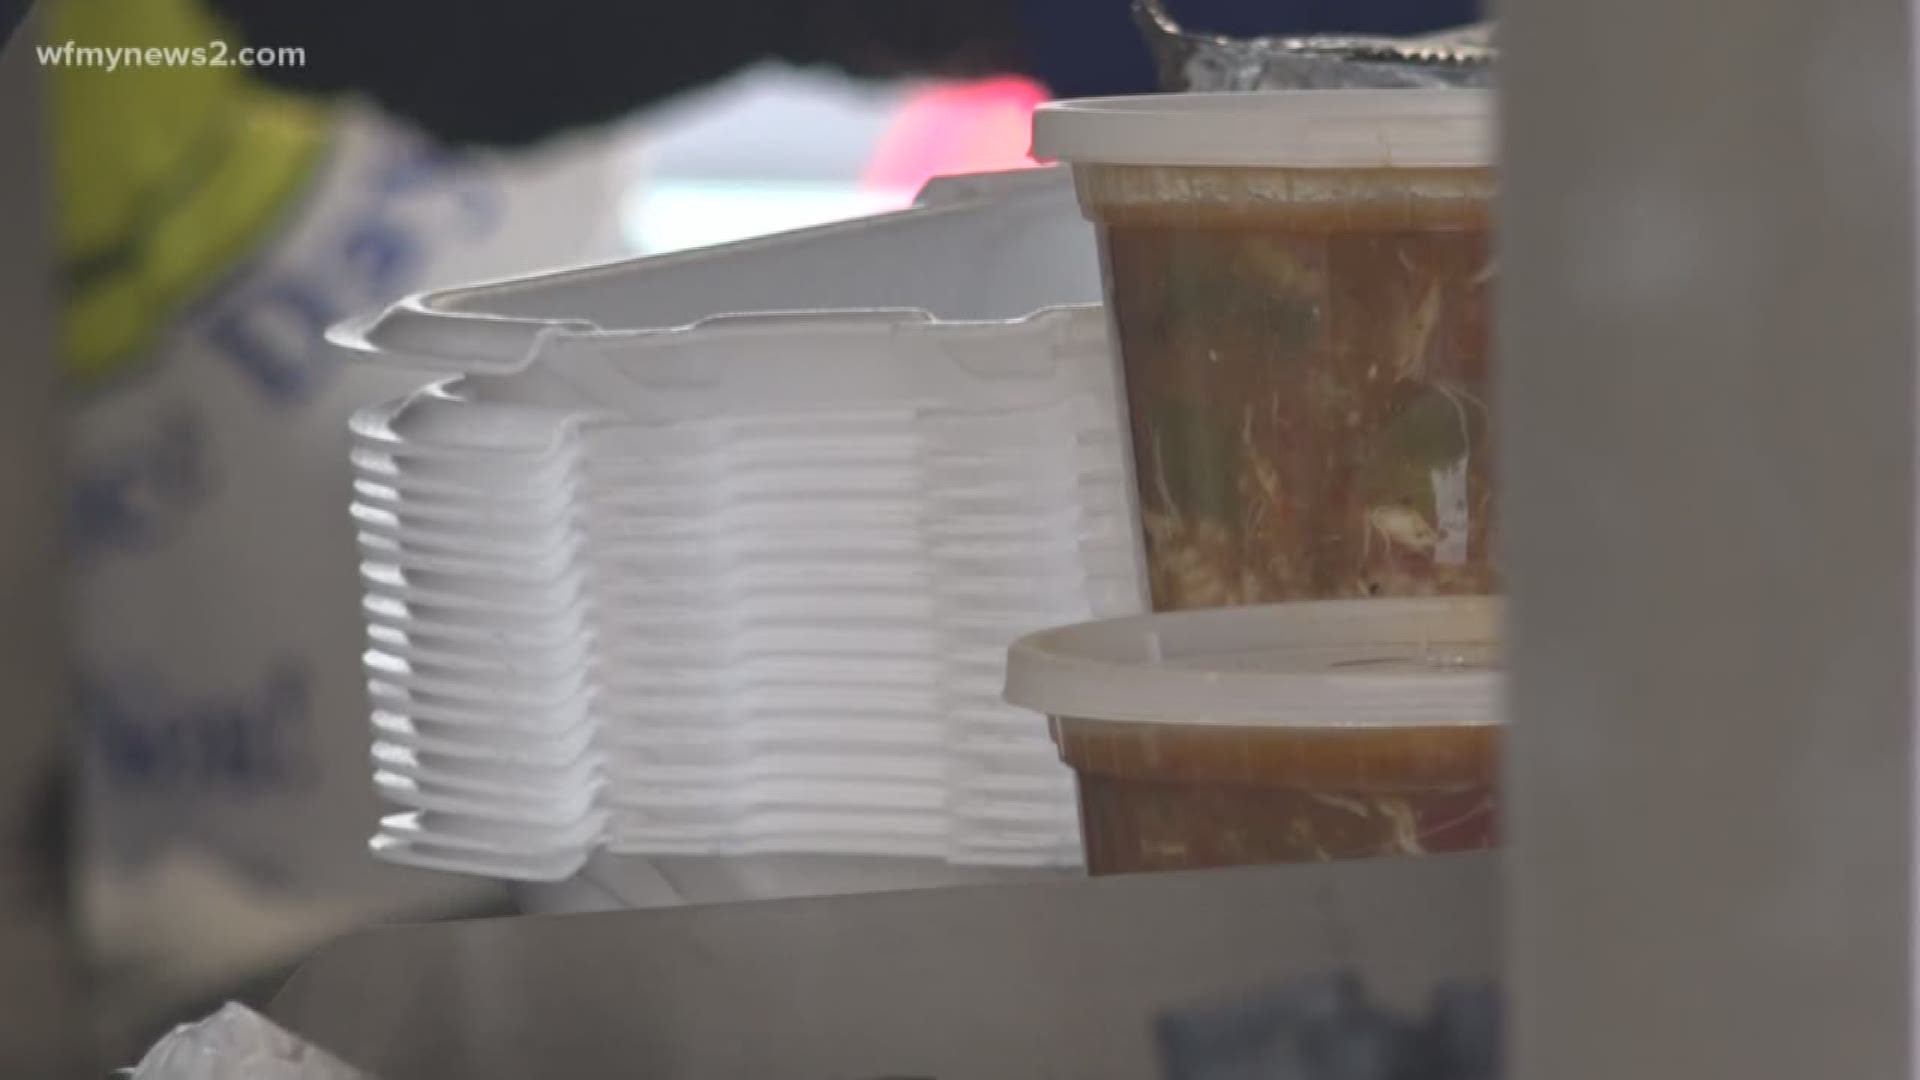 People who stop for a meal at their food truck are leaving with plates of baked fish and seafood gumbo.